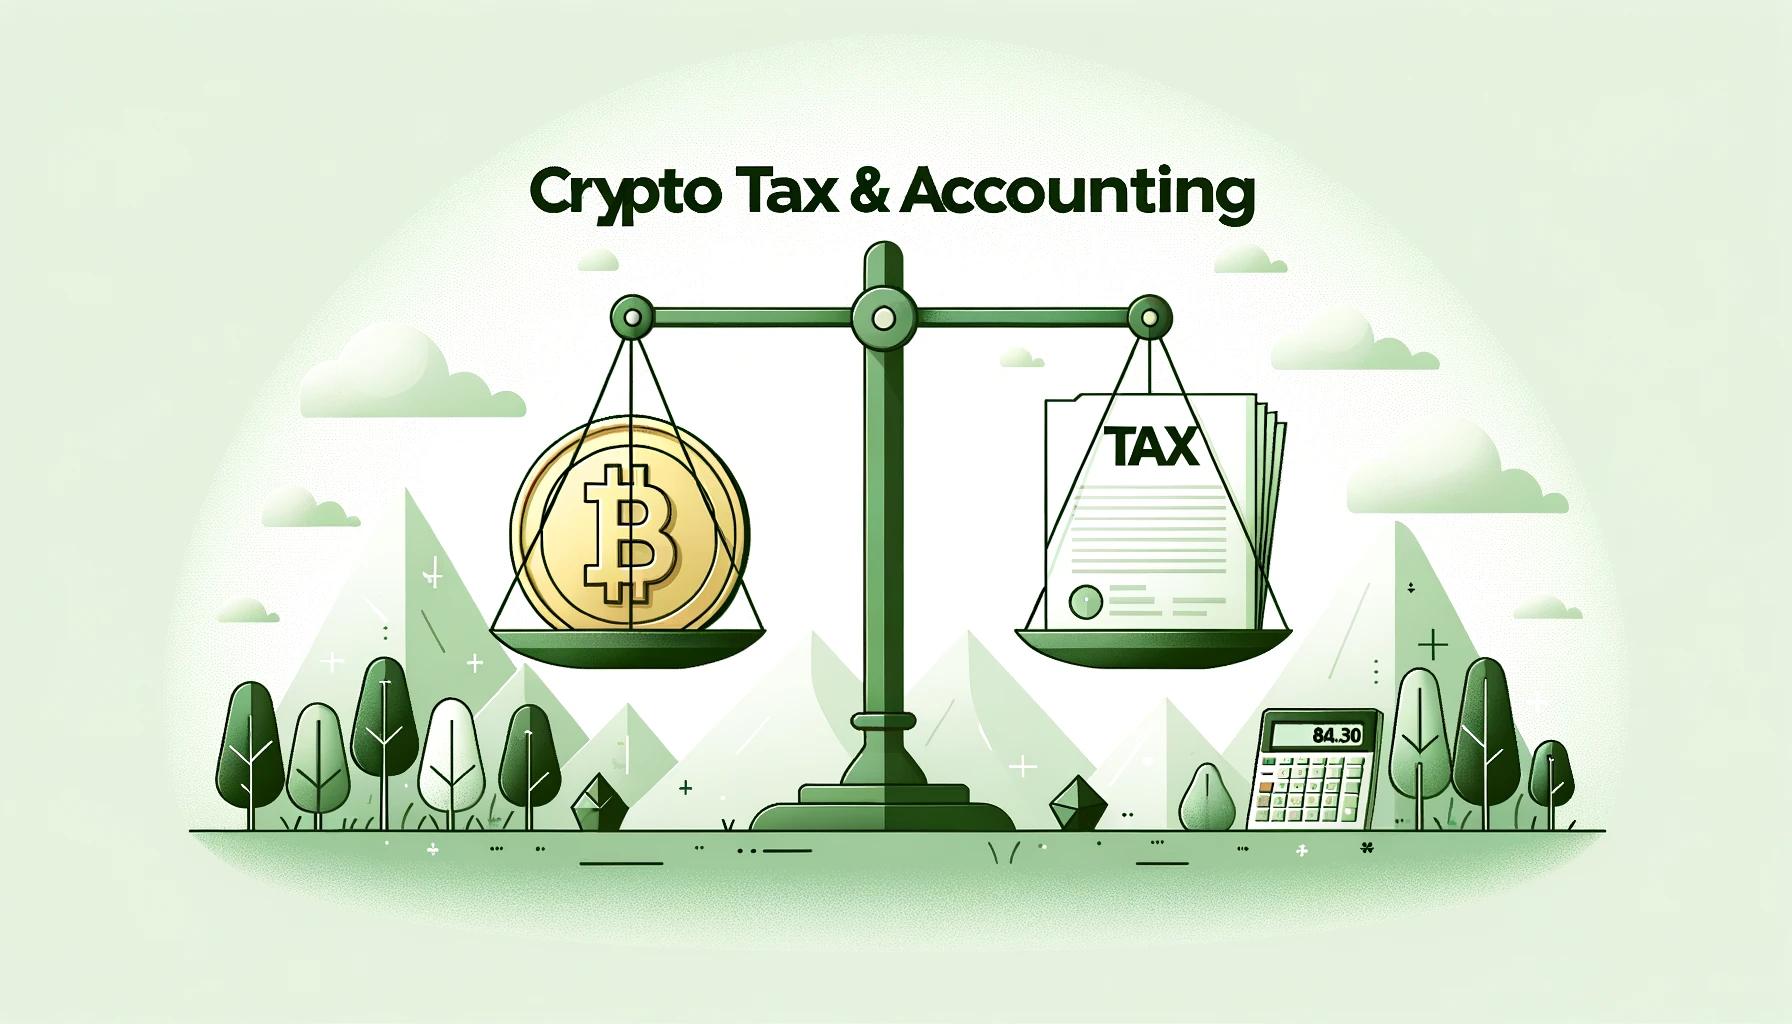 Crypto tax and accounting blog niches